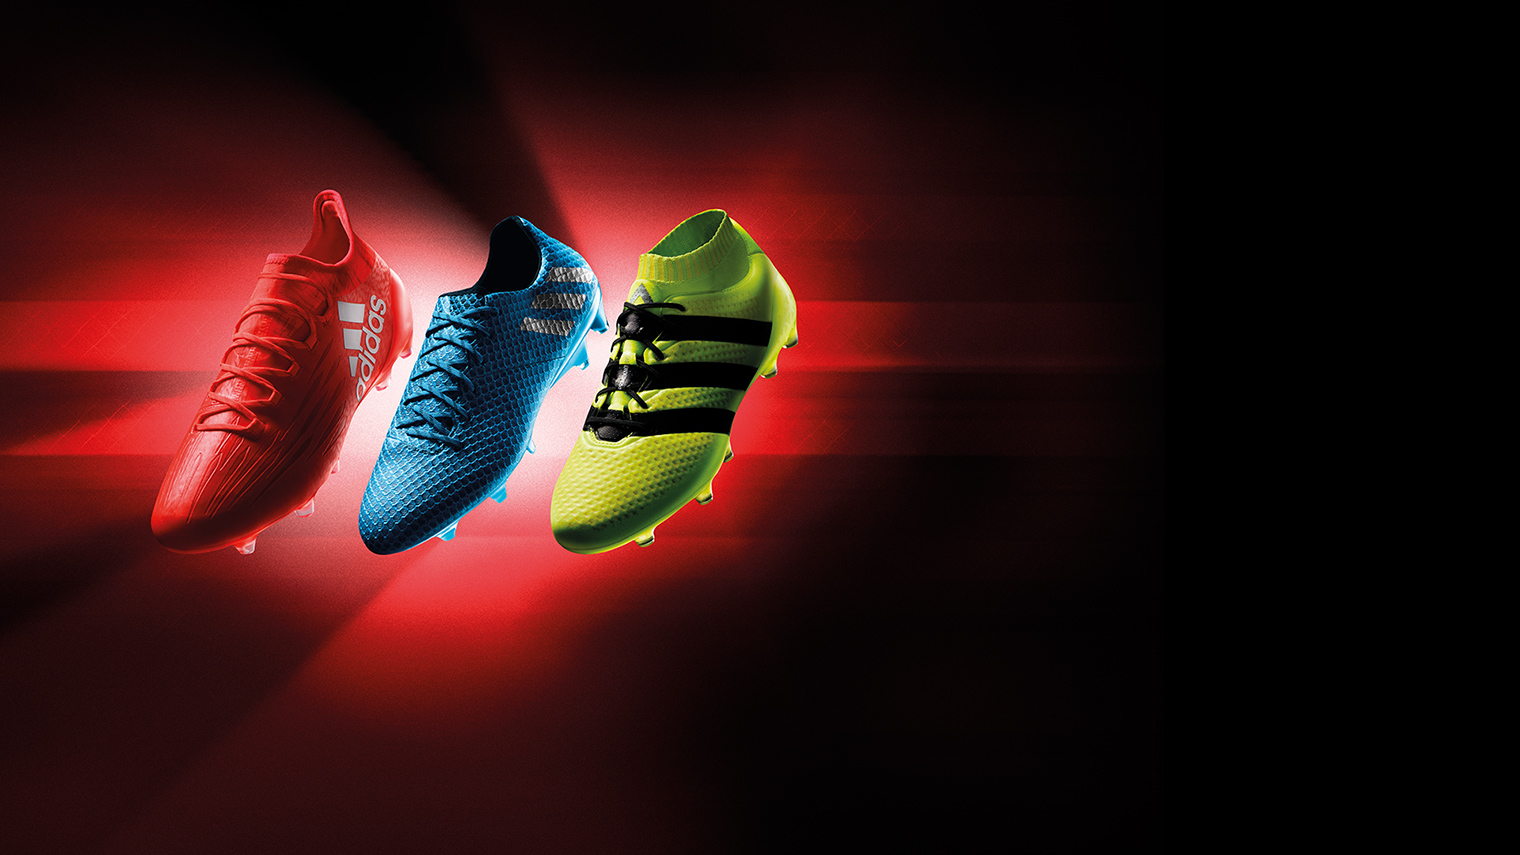 New adidas Speed of light cleats collection!